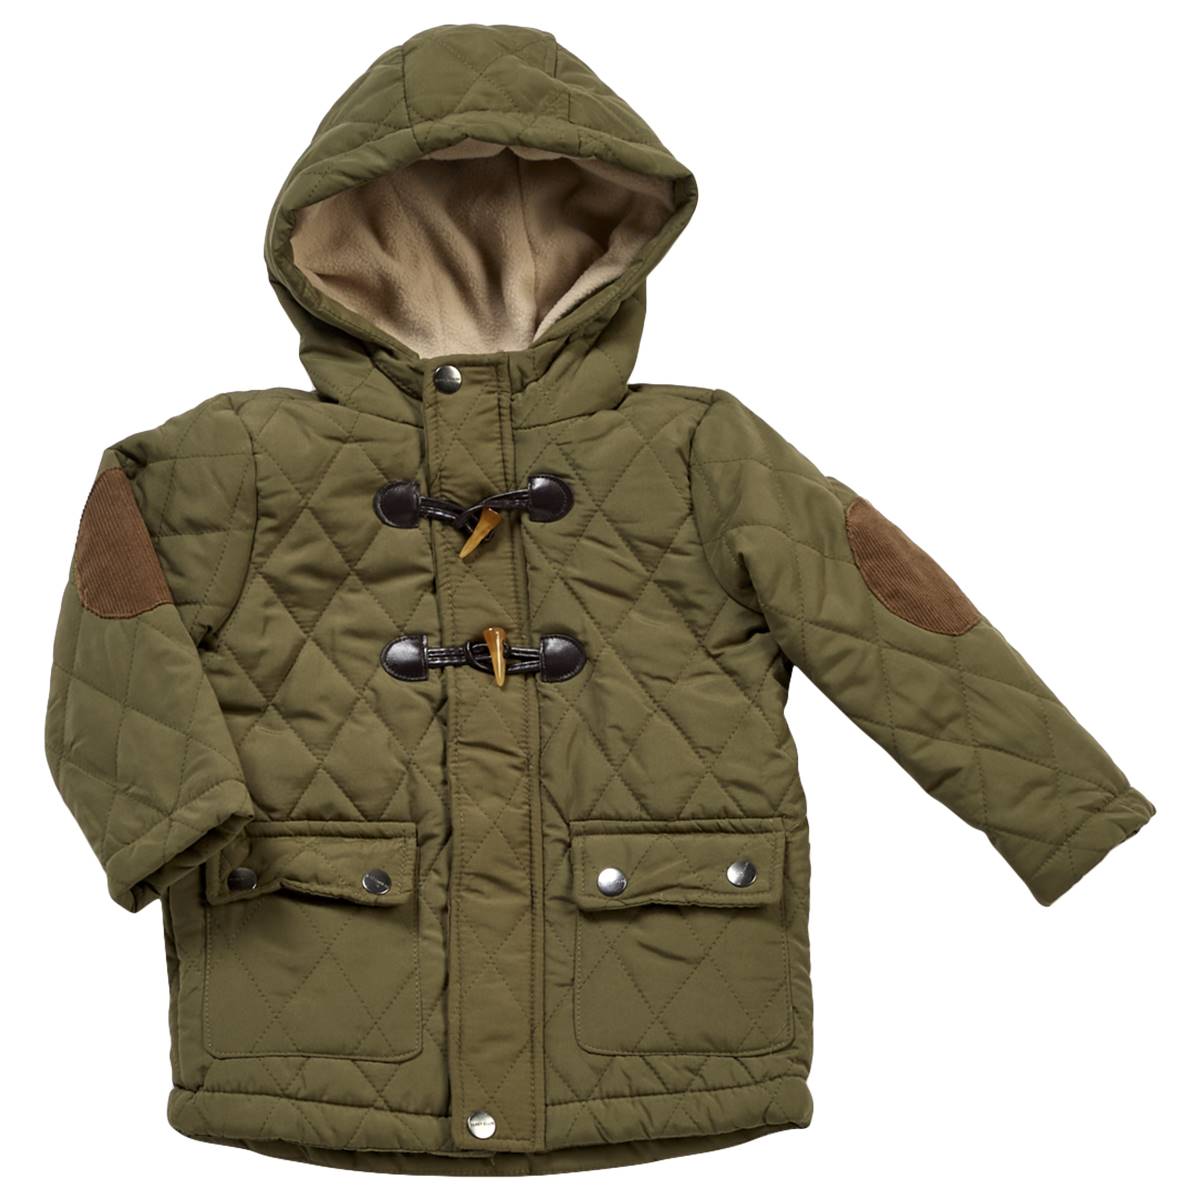 Toddler Boy Perry Ellis(R) Quilted Toggle Jacket